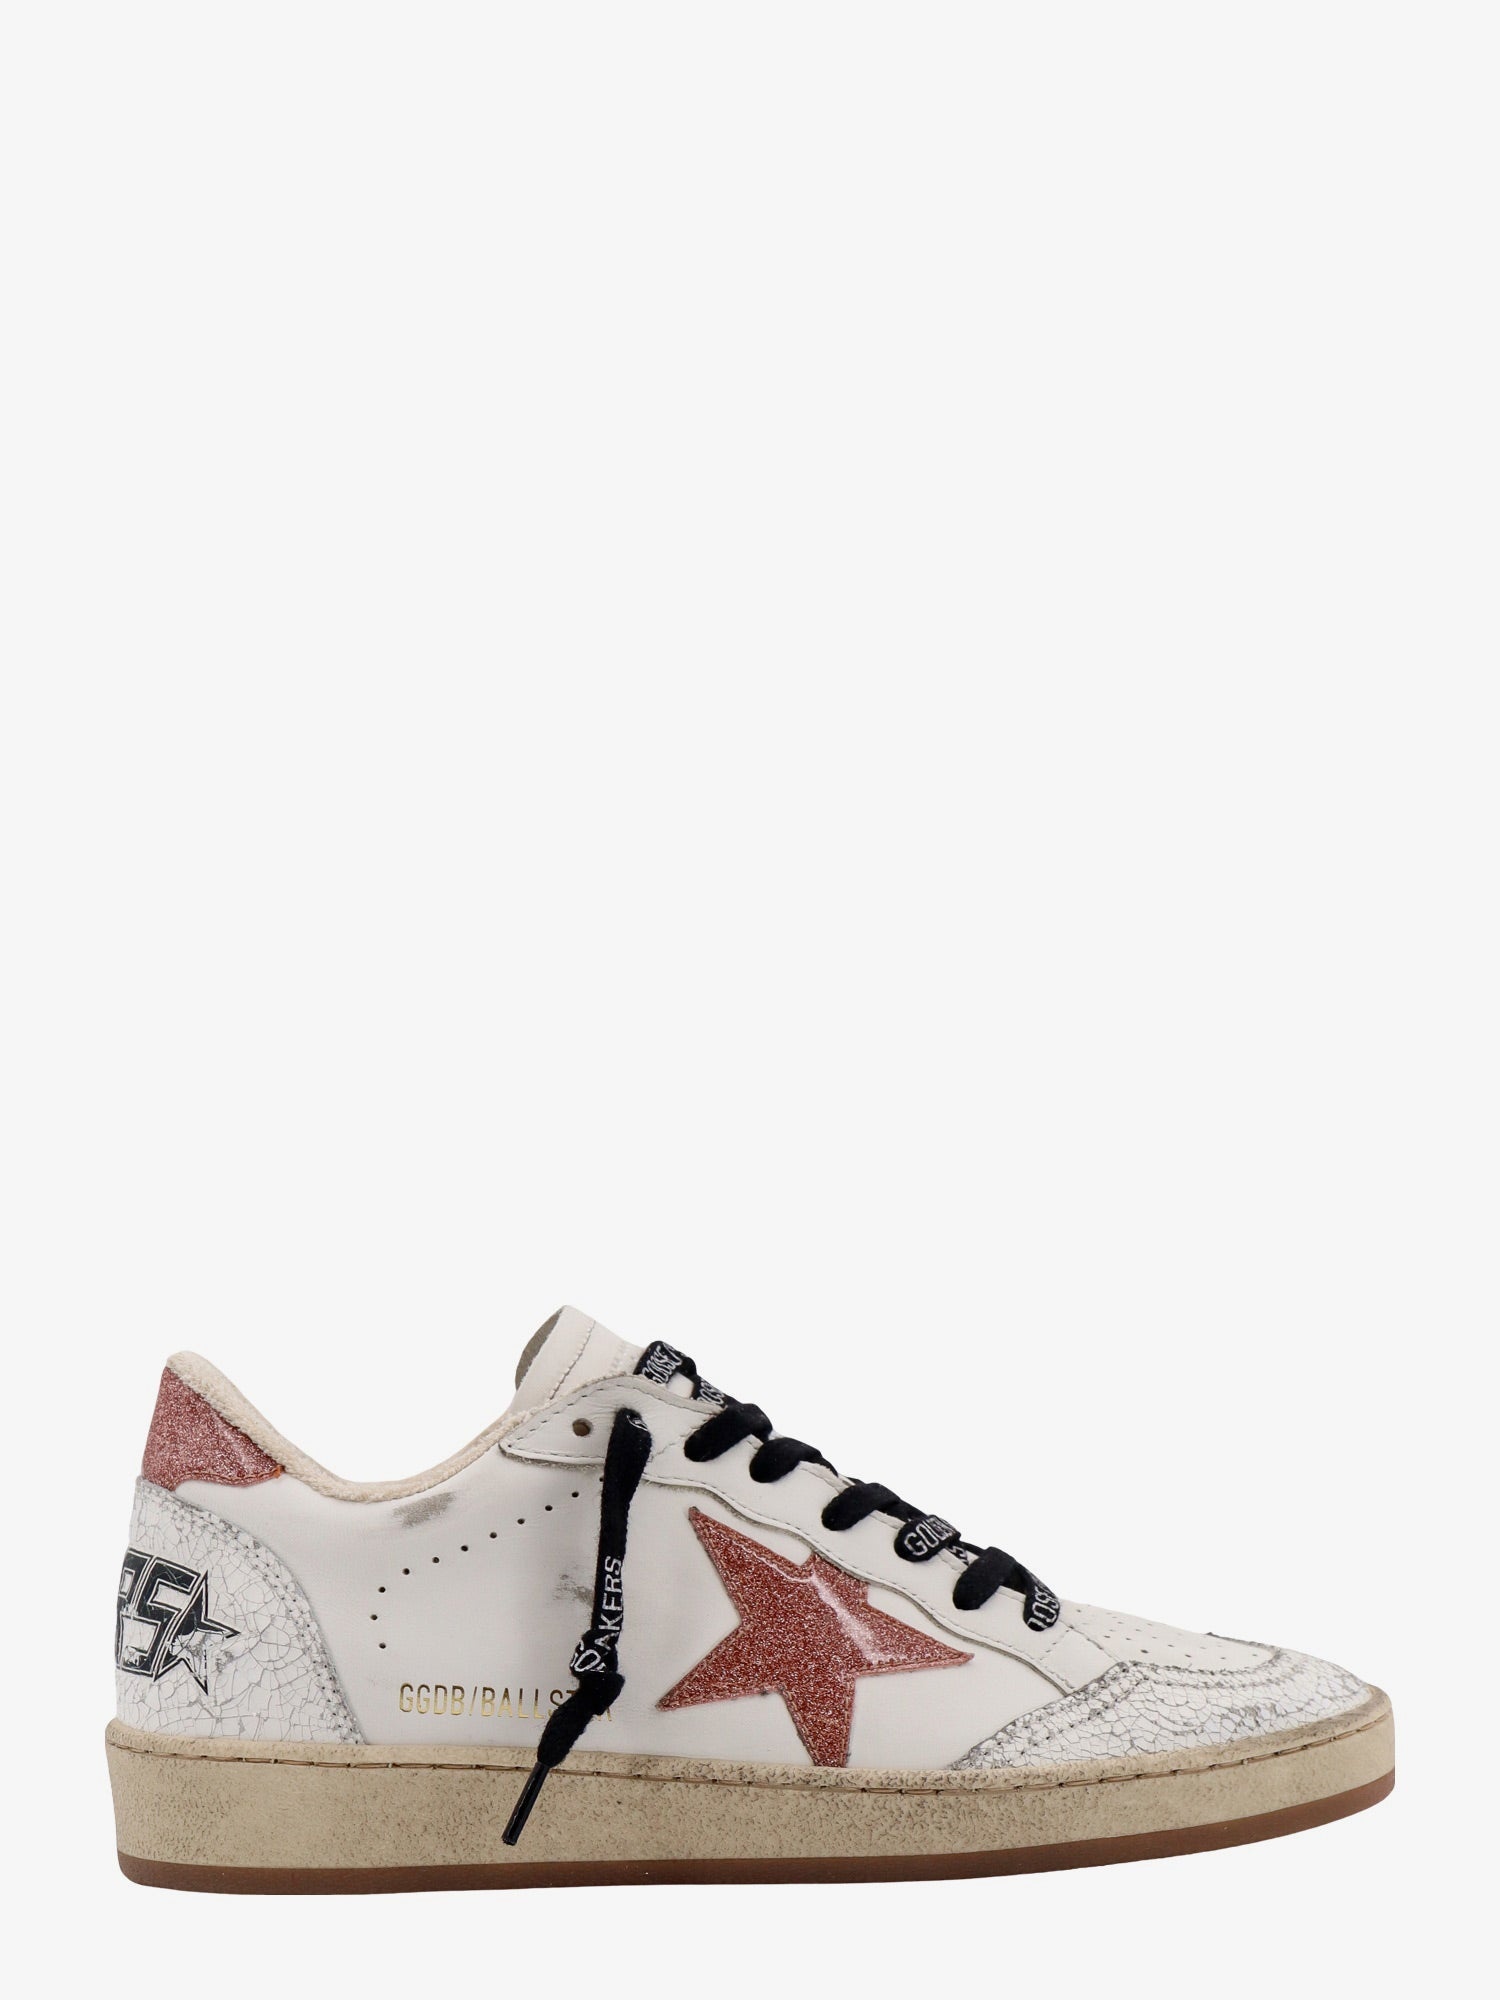 Golden Goose Deluxe Brand Woman Ball Star Woman White Sneakers - 1